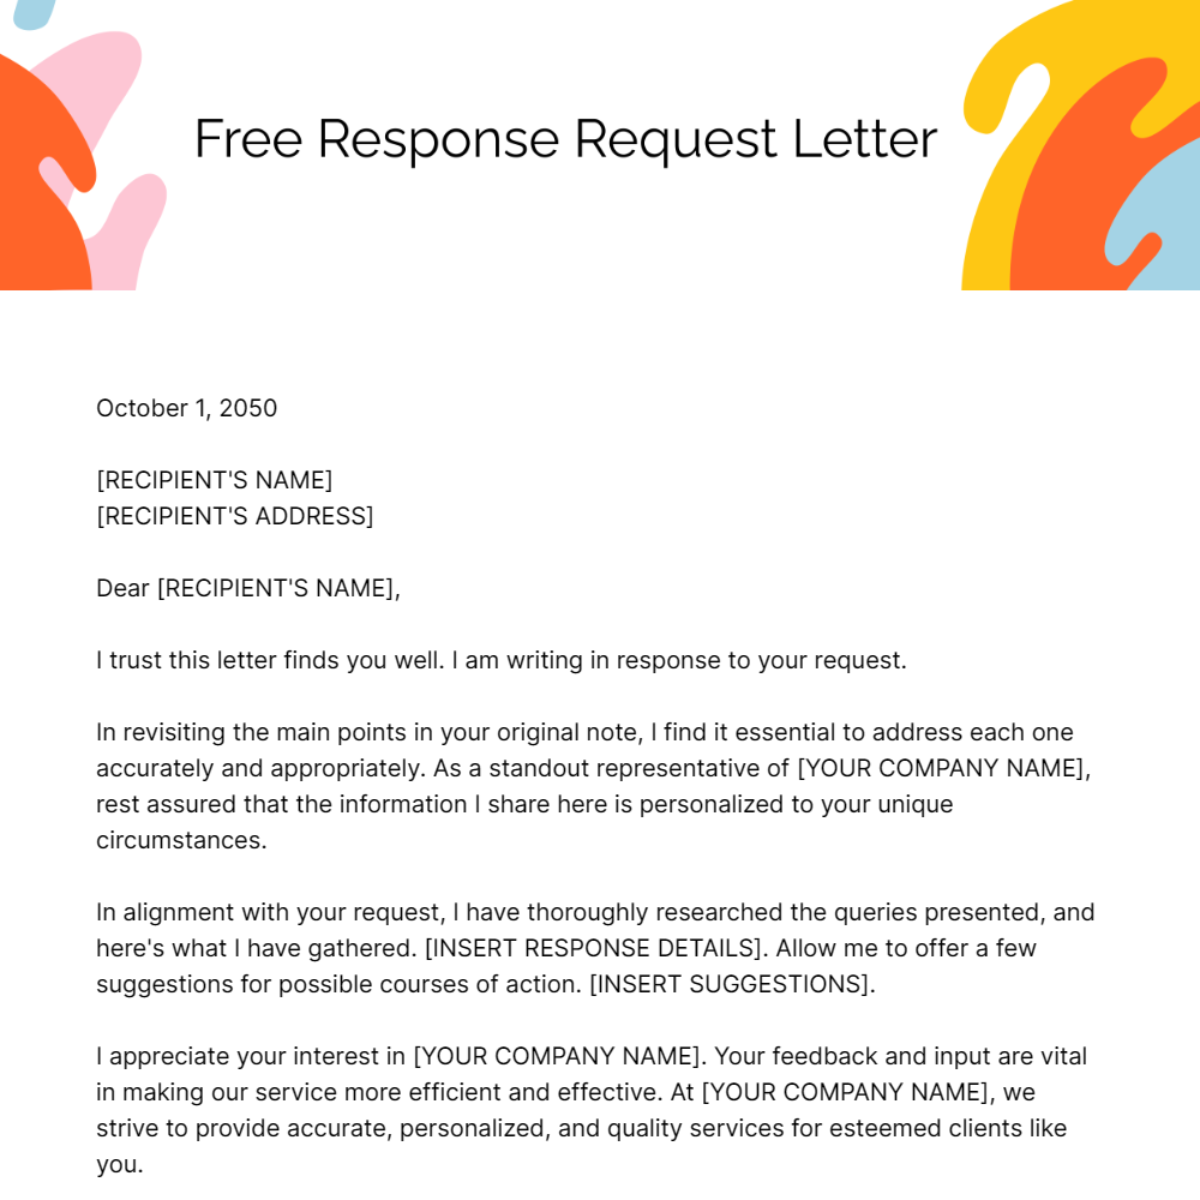 Free Response Request Letter